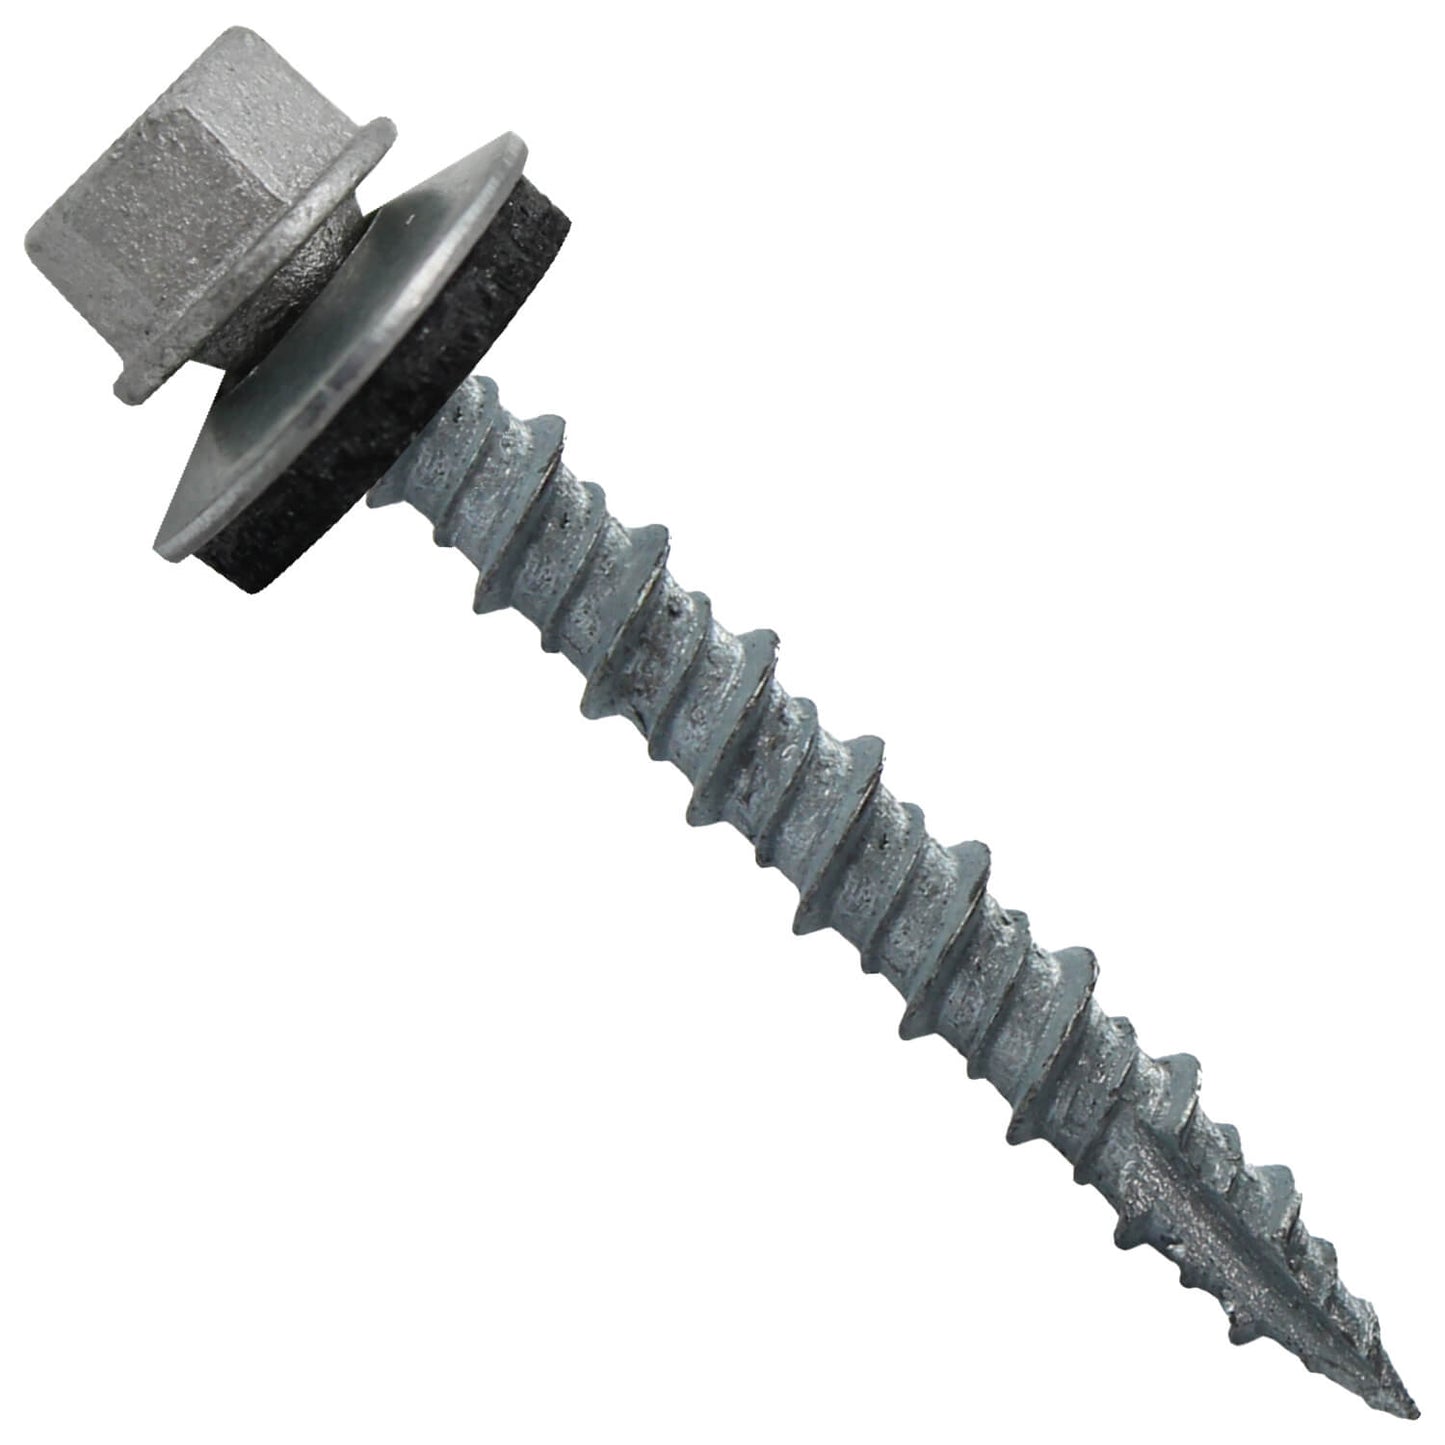 10 x 1-1/2" Galvanized Hex Head Sheet Metal Roof Screw. Self starting metal to wood siding screws. EPDM washer. No Paint - 50 Count